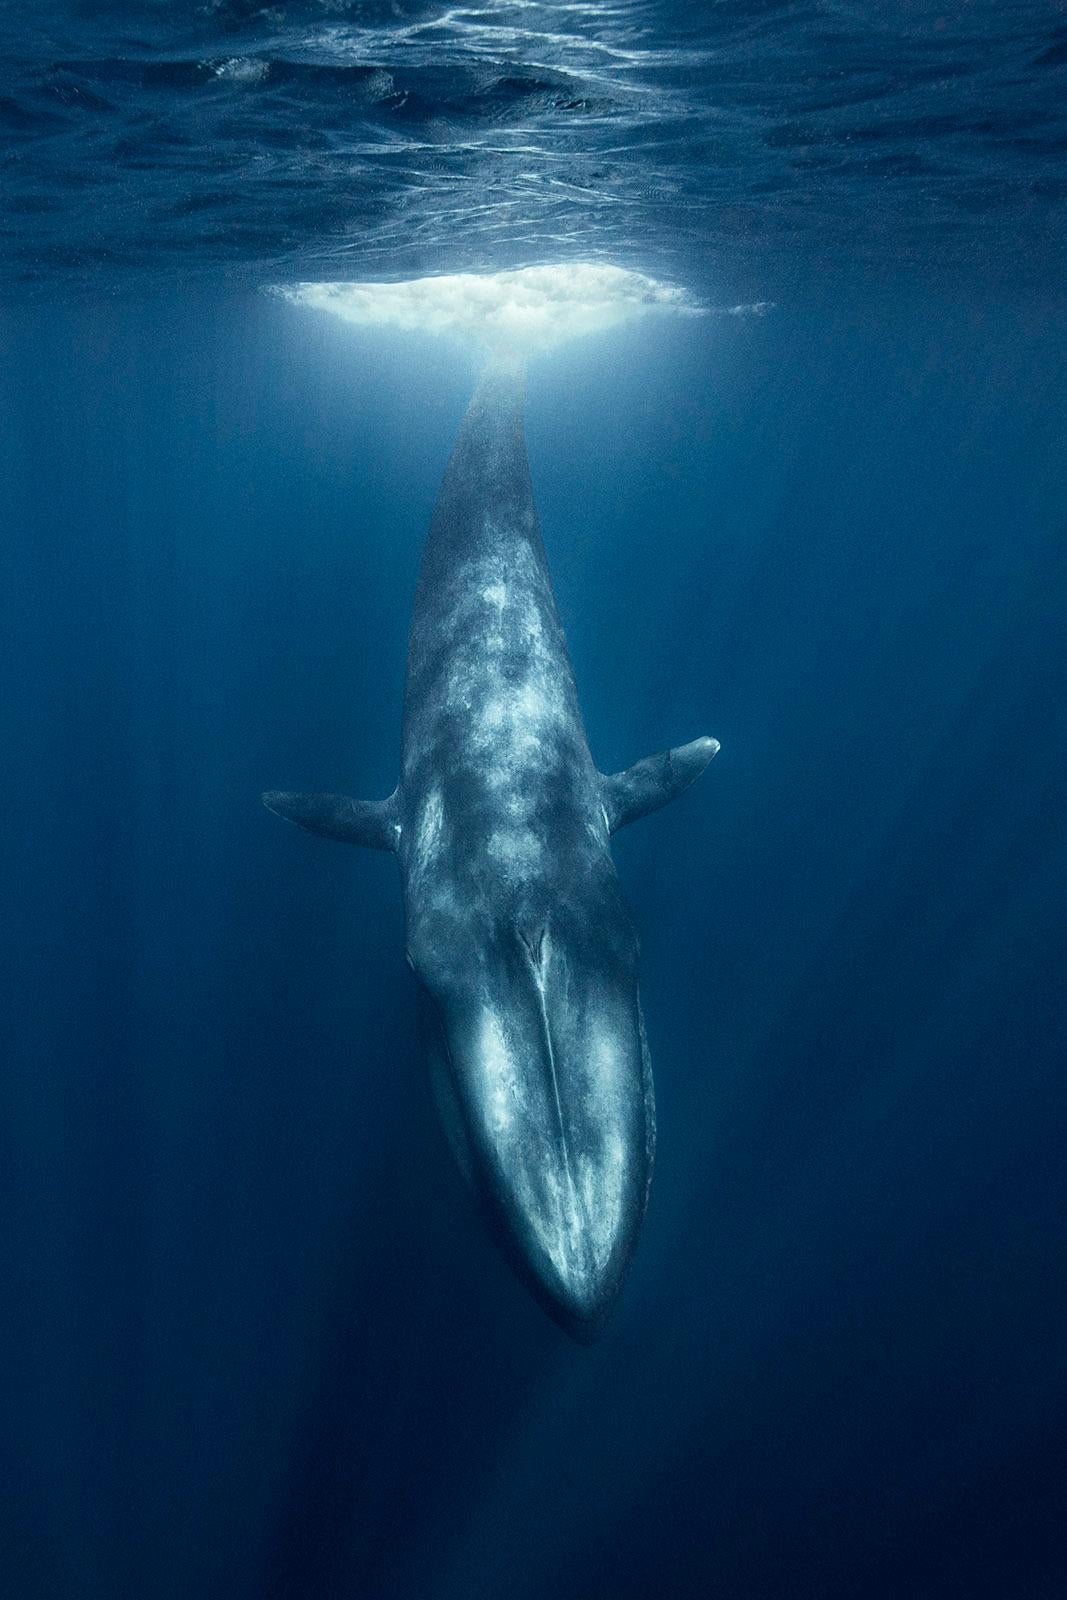 Dives Blue Whale - Signed limited edition archival pigment print, 2018   -  Edition of 5
Sri Lanka   -  One second in the blue….

This is an Archival Pigment print on fiber based paper ( Hahnemühle Photo Rag® Baryta 315 gsm , Acid-free and